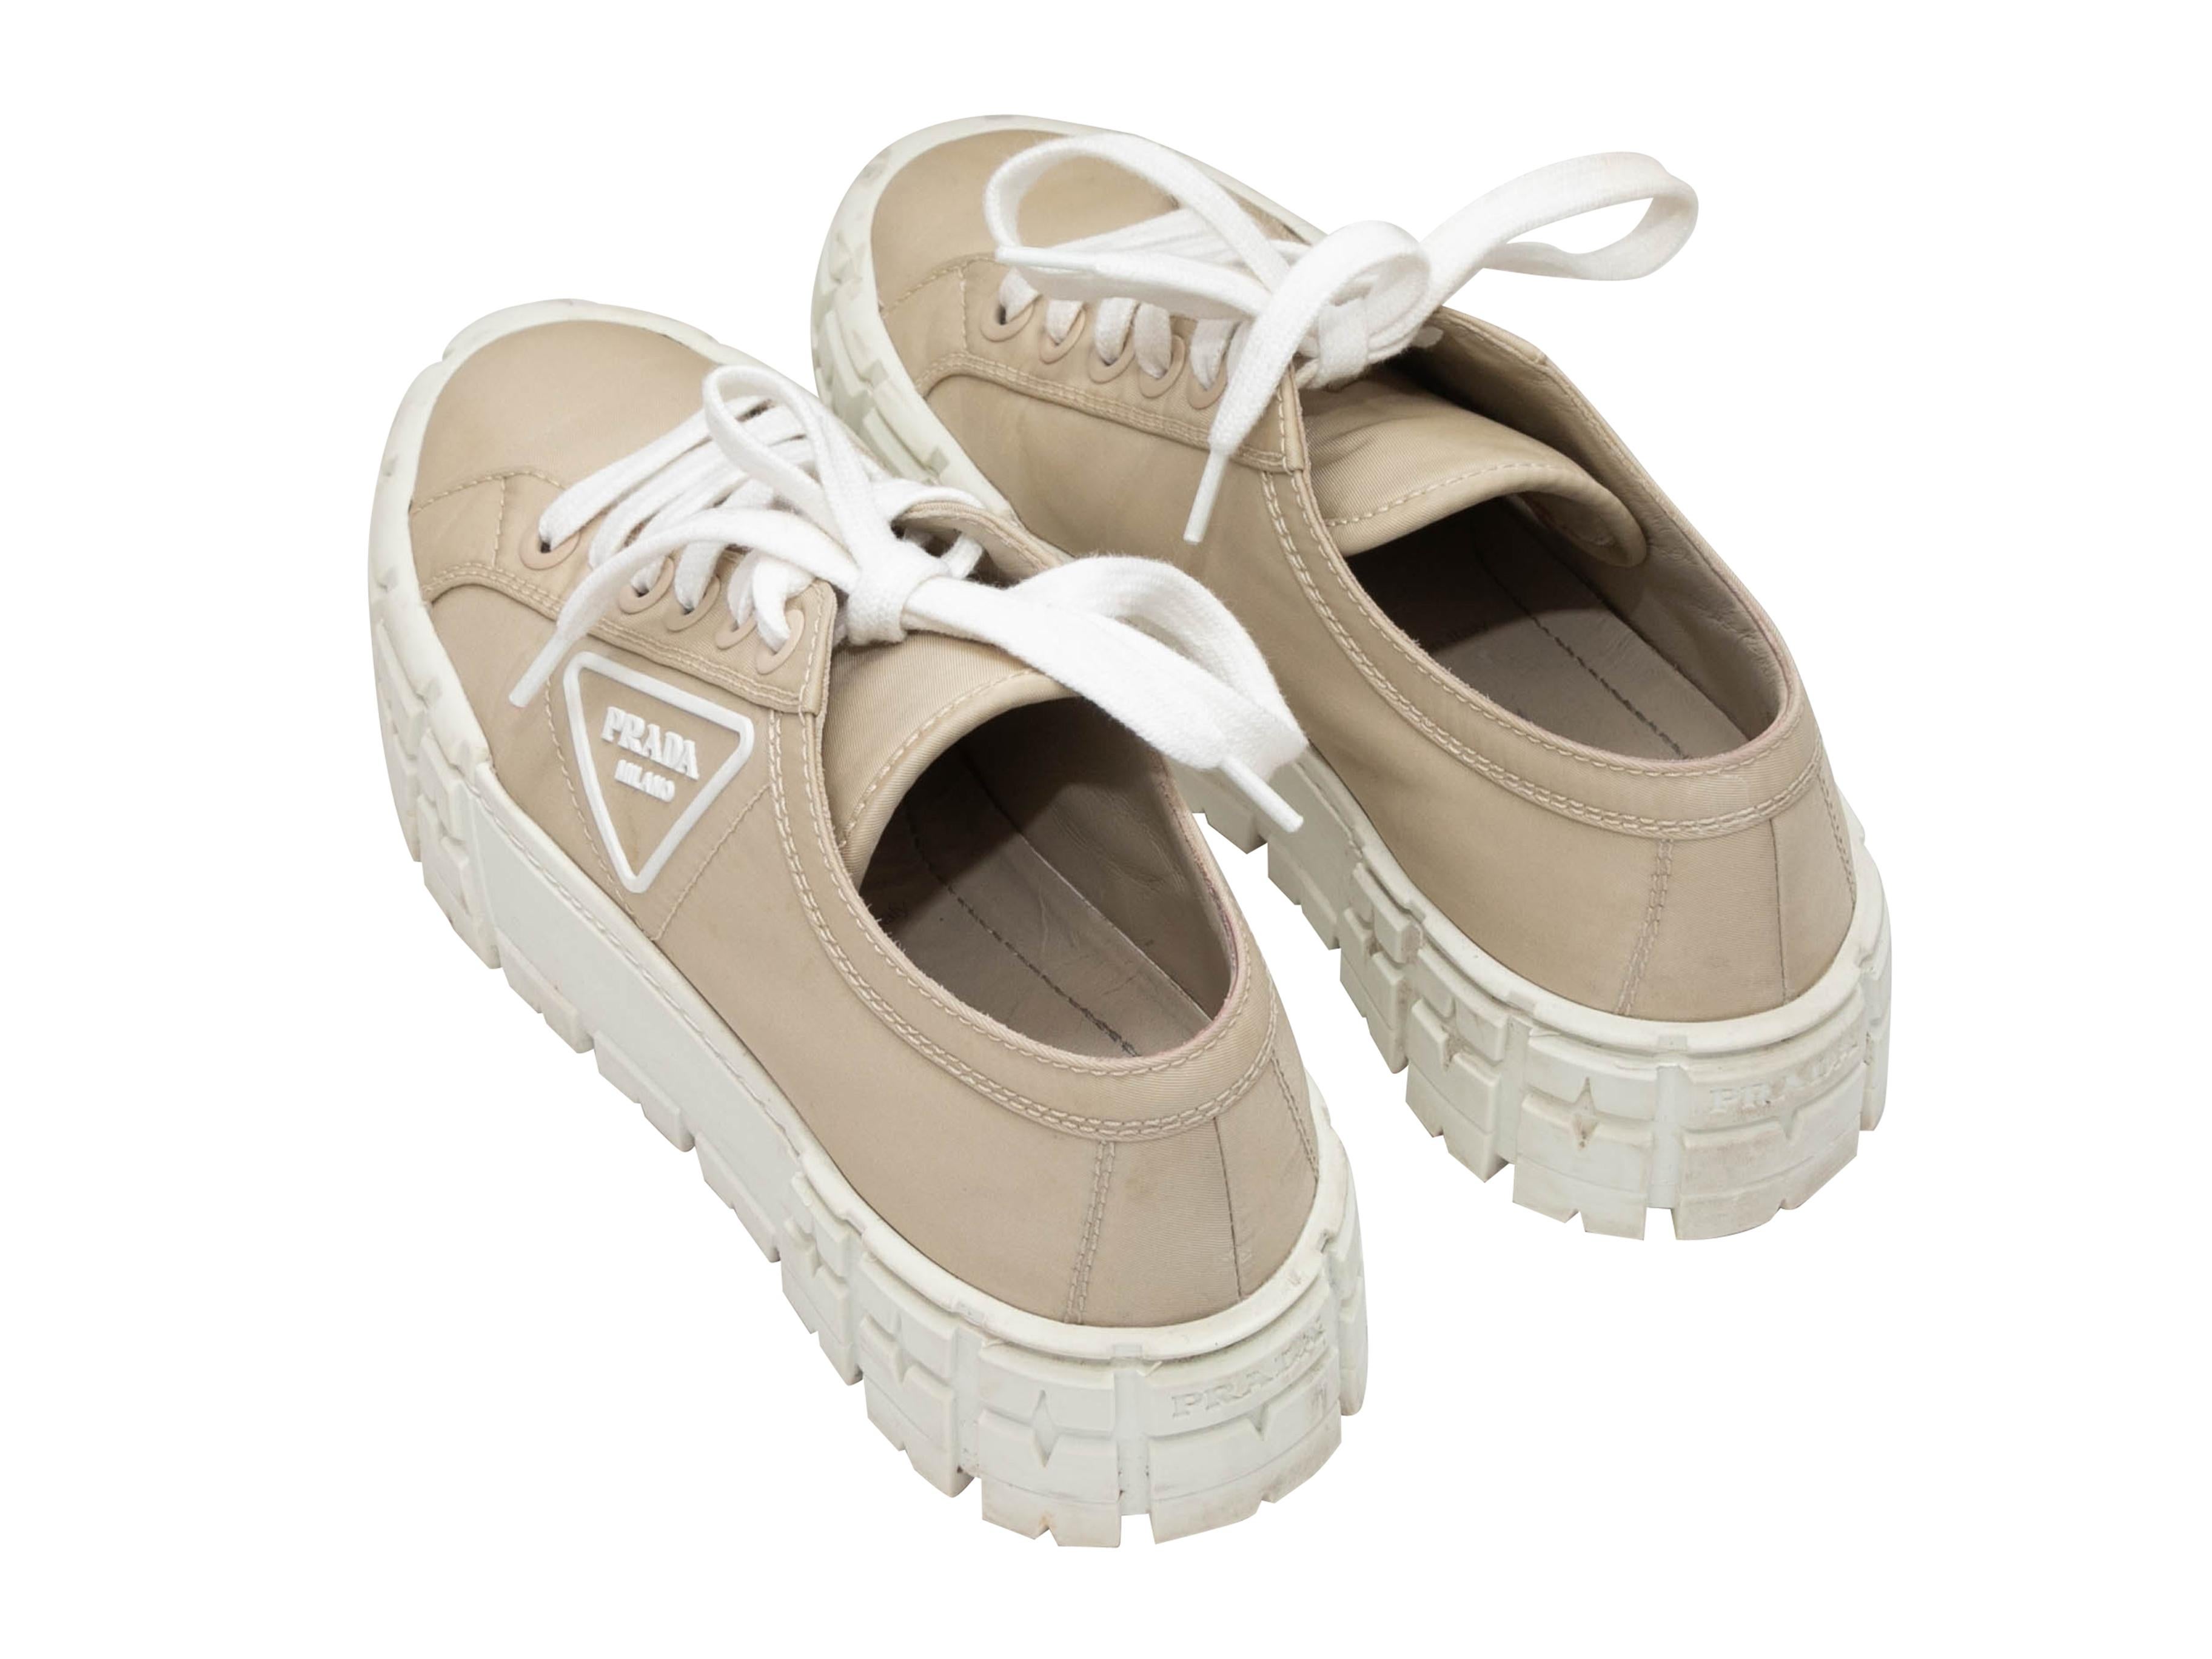 Beige & White Prada Double Wheel Re-Nylon Platform Sneakers Size 38 In Good Condition For Sale In New York, NY